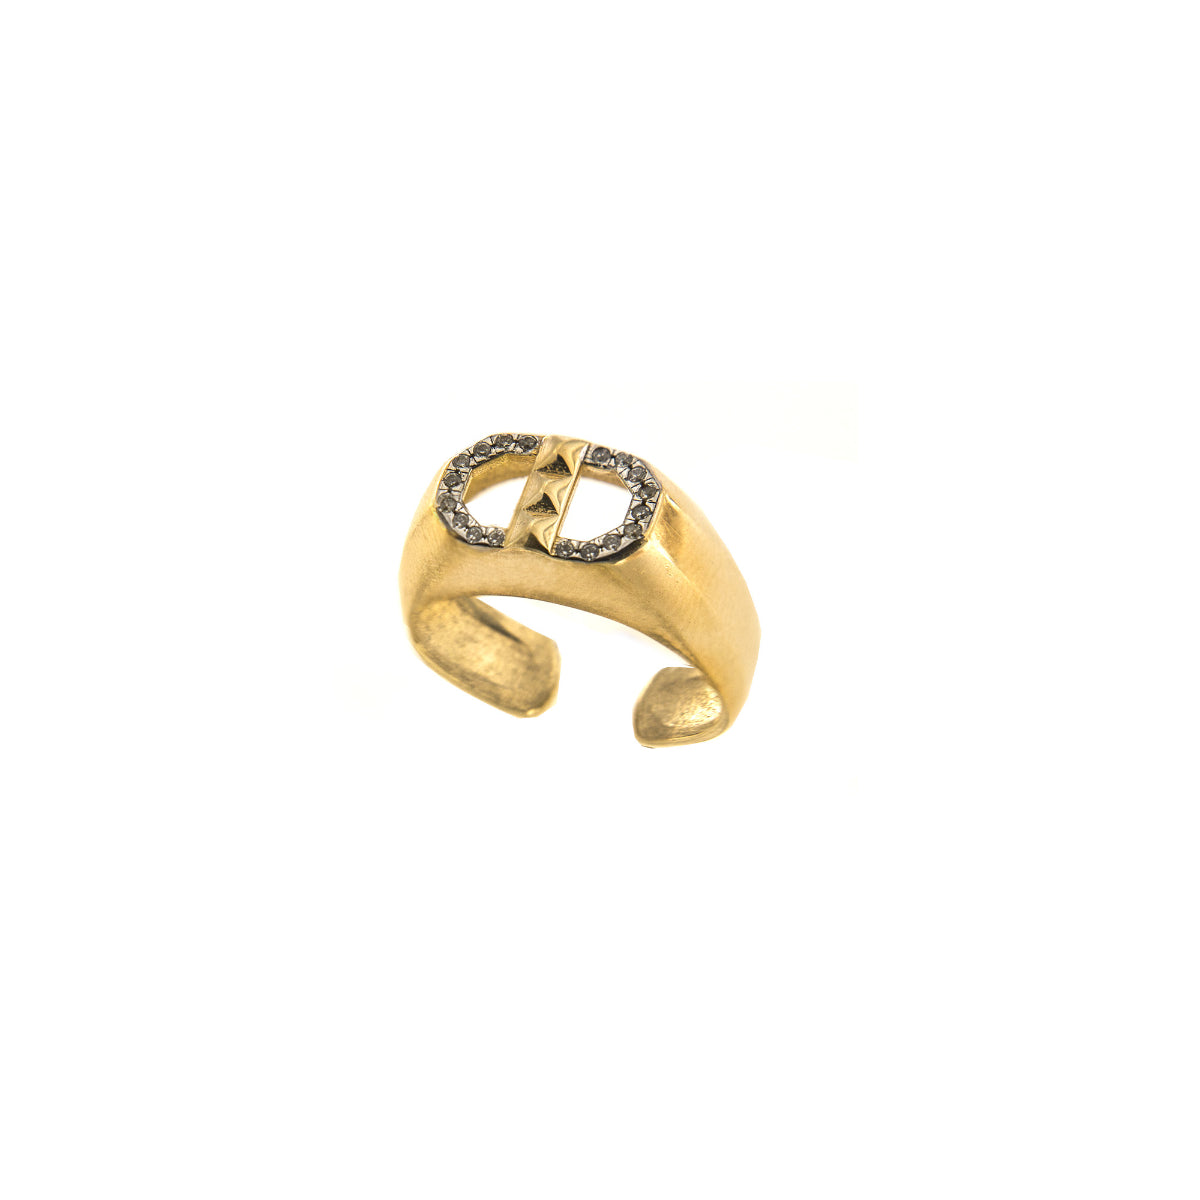 Rings - Pinky chevalier ring marine link and studs  - 2 | Rue des Mille